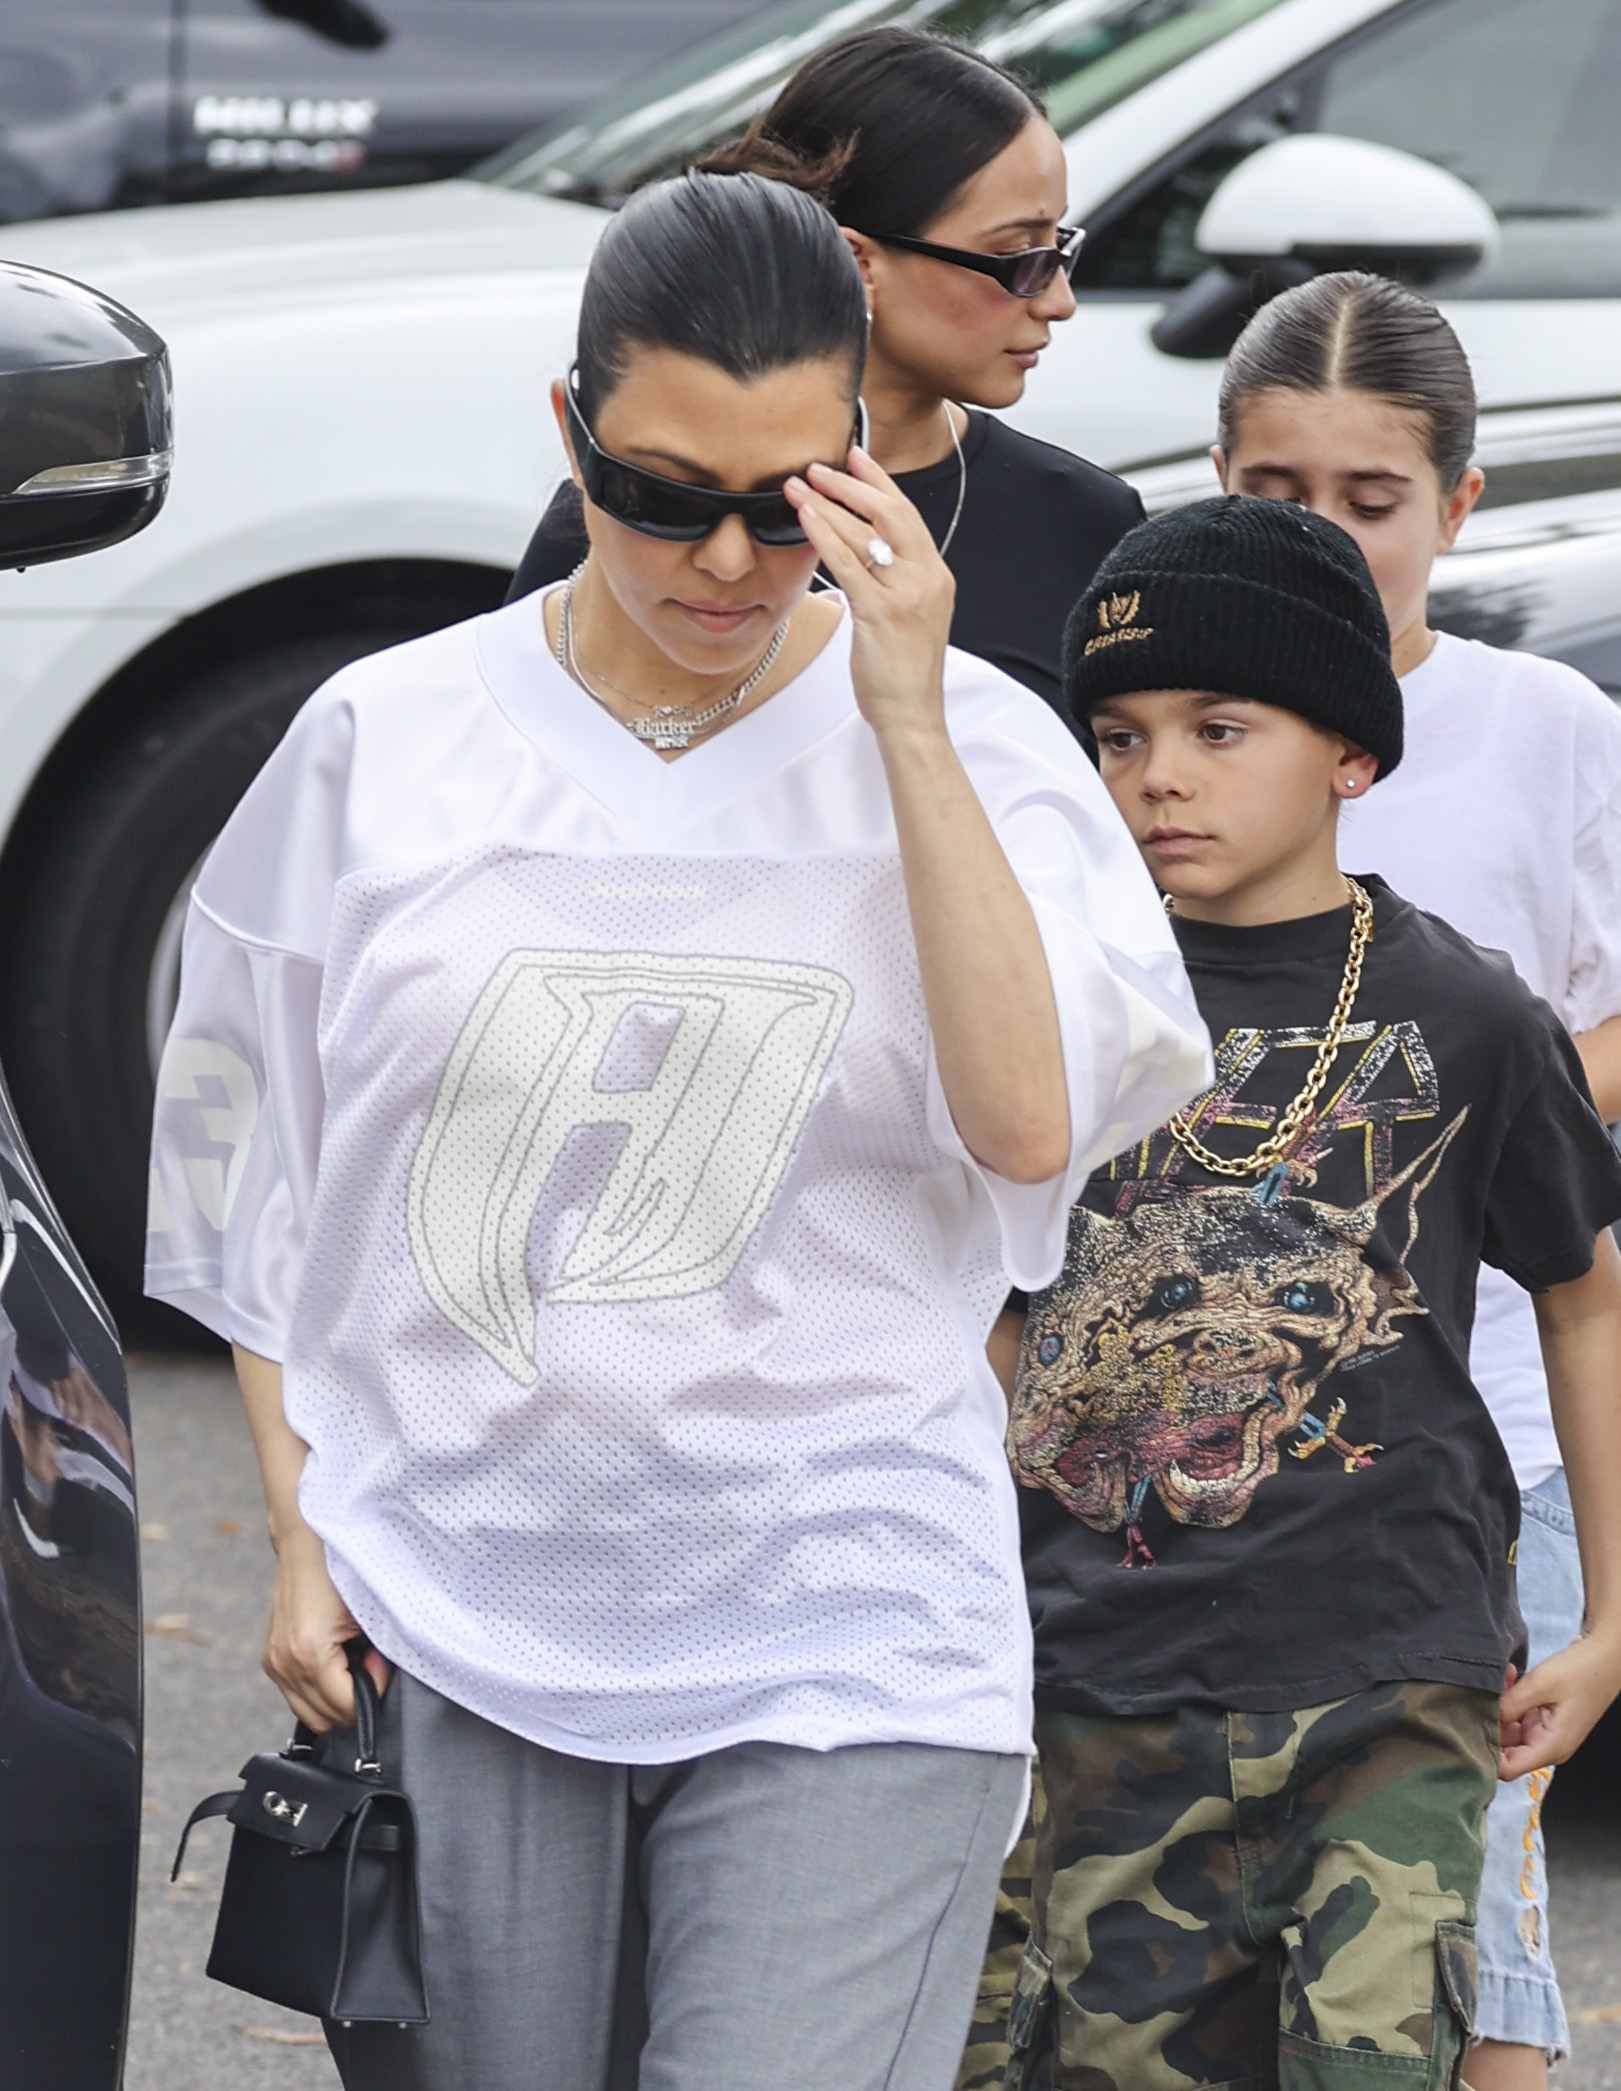 Kourtney Kardashian was spotted with her children, Penelope and Reign